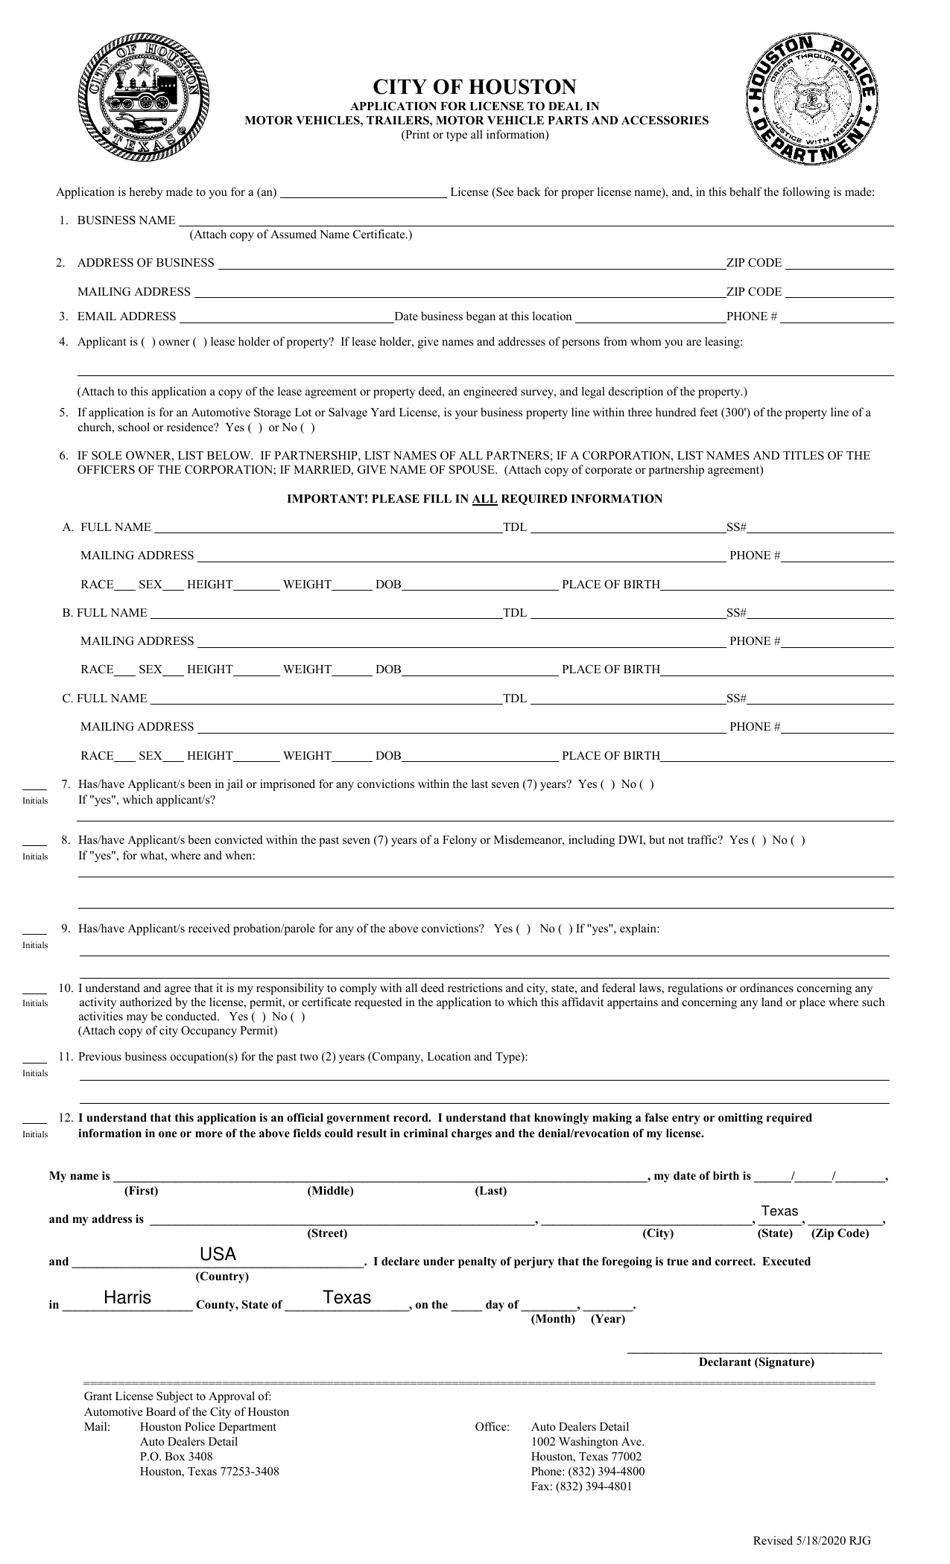 Application for License to Deal in Motor Vehicles, Trailers, Motor Vehicle Parts and Accessories - City of Houston, Texas, Page 1